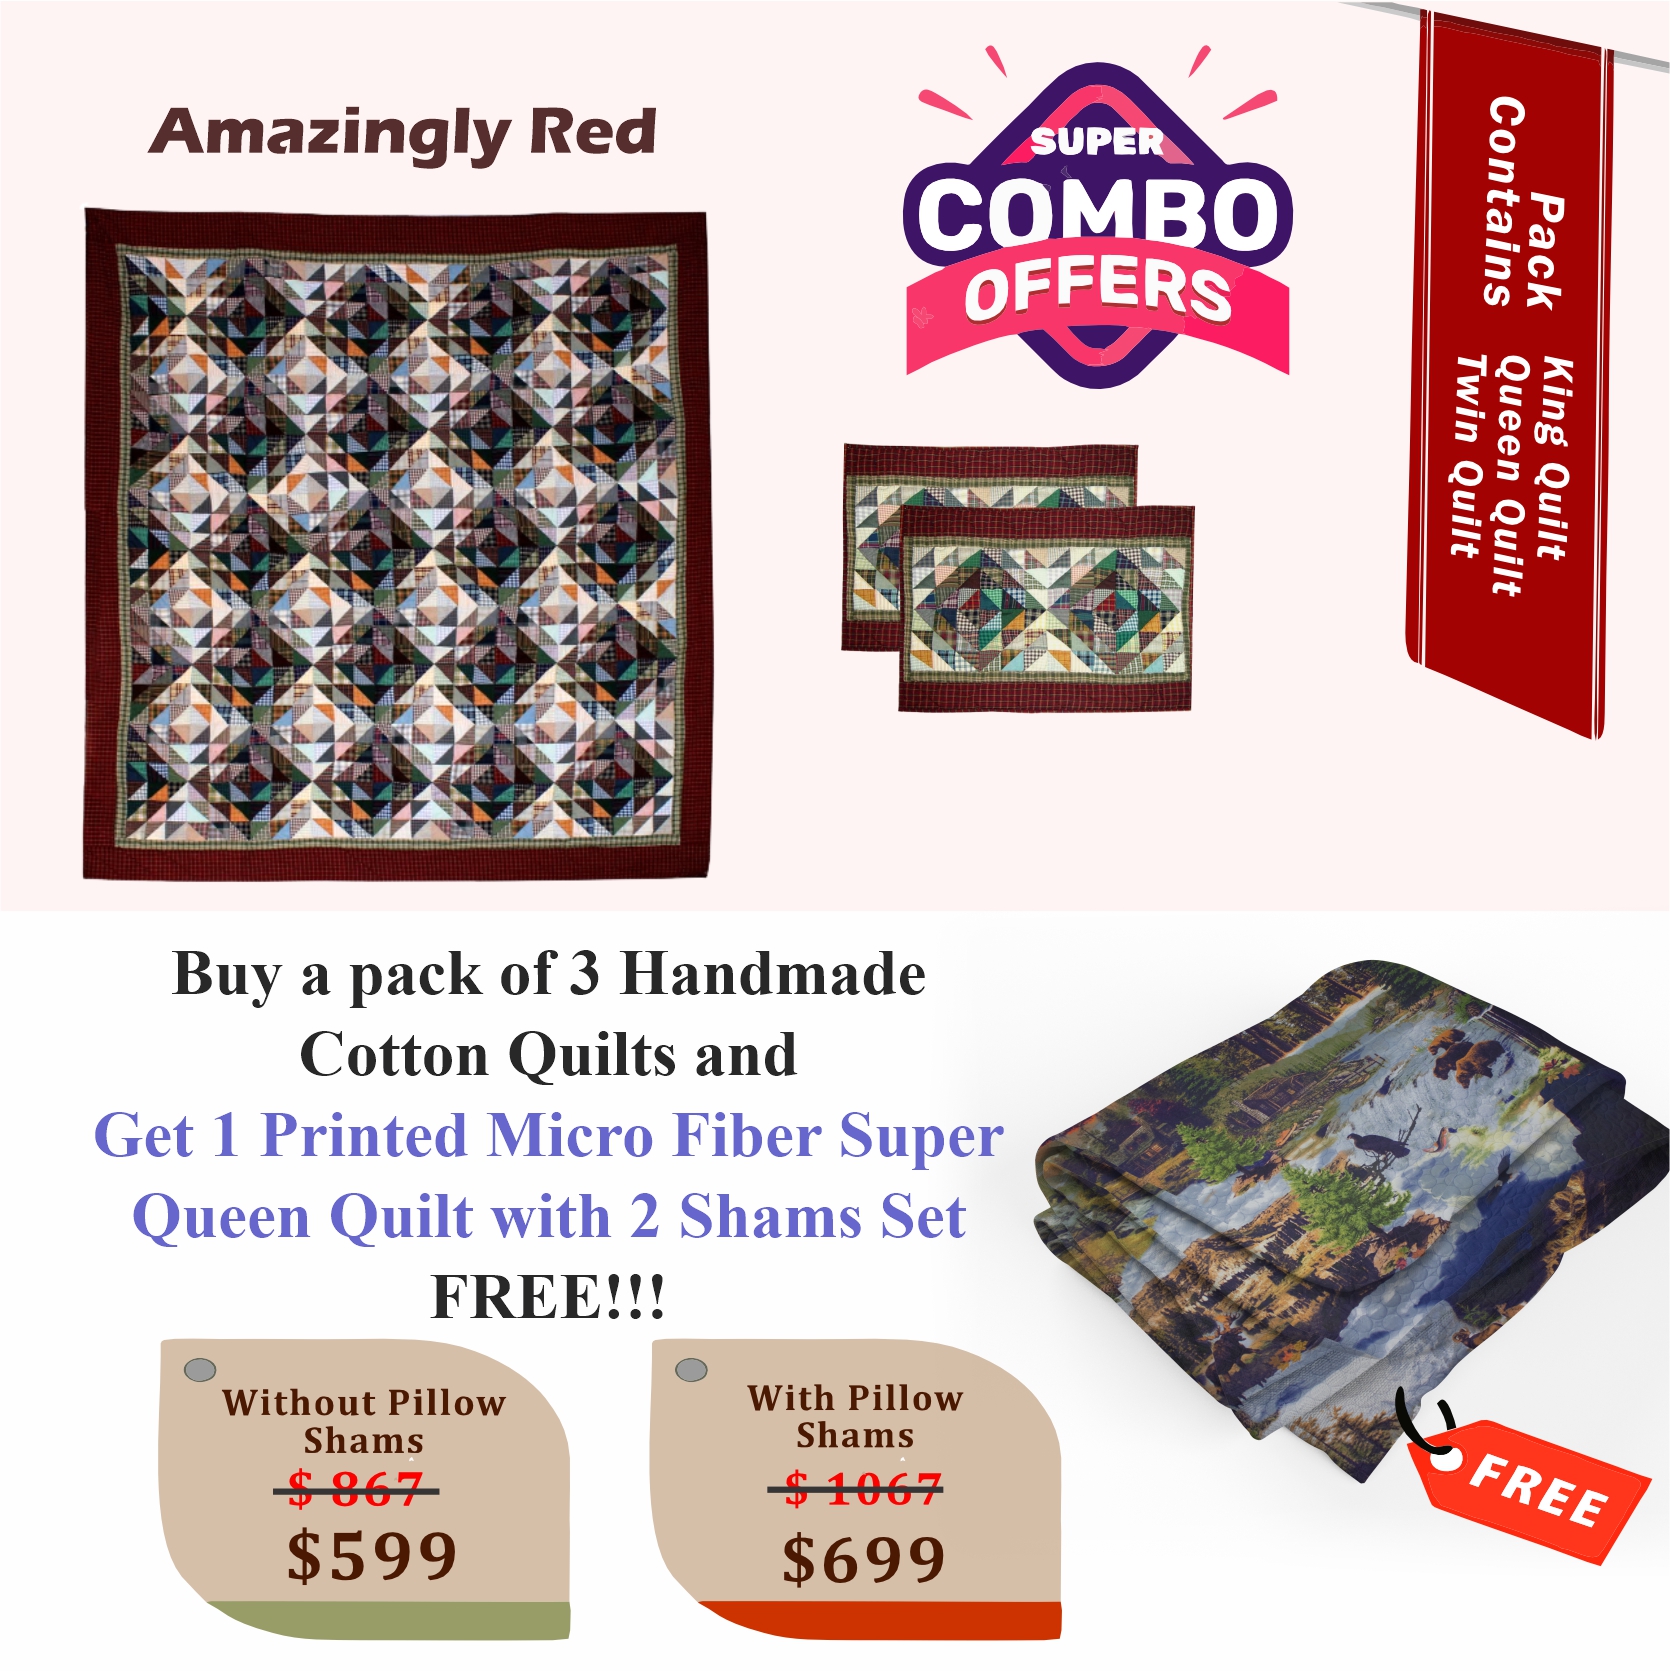 Amazingly Red- Handmade Cotton quilts | Buy 3 cotton quilts and get 1 Printed Microfiber Super Queen Quilt with 2 Shams set FREE